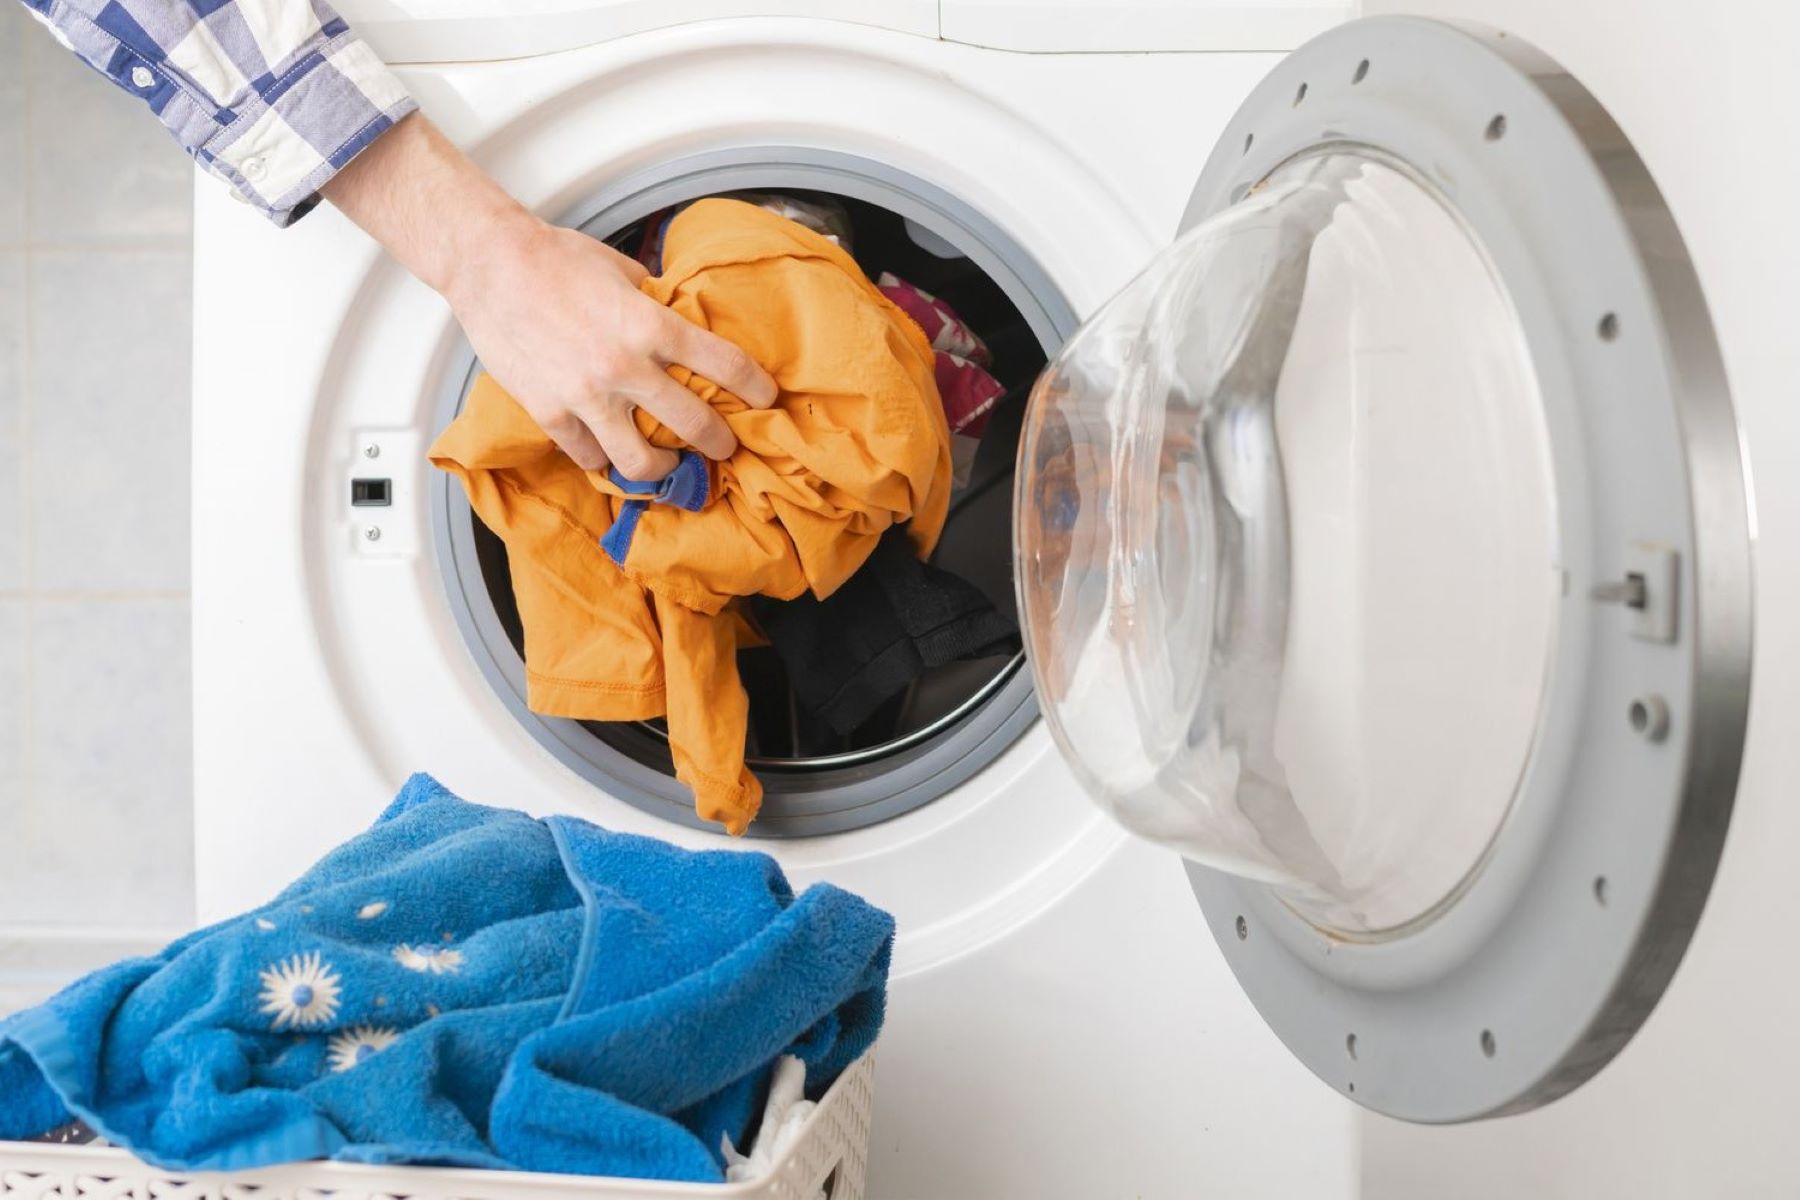 How To Soak Clothes In A Samsung Front Load Washing Machine